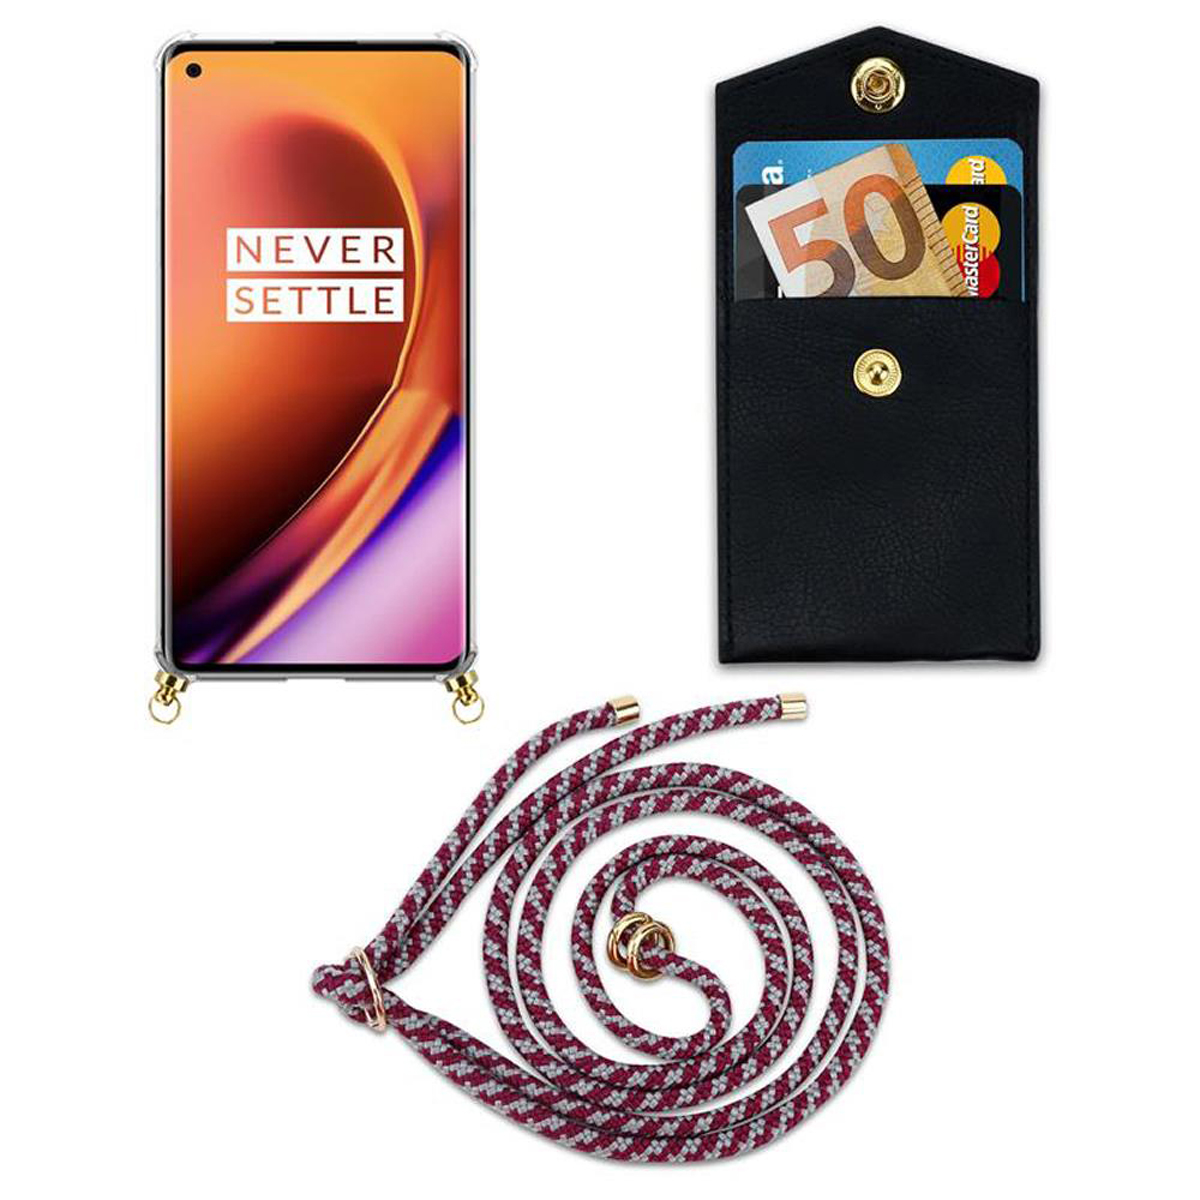 CADORABO Handy Kette mit WEIß Backcover, und Hülle, OnePlus, Gold abnehmbarer ROT Kordel Band PRO, 8 Ringen